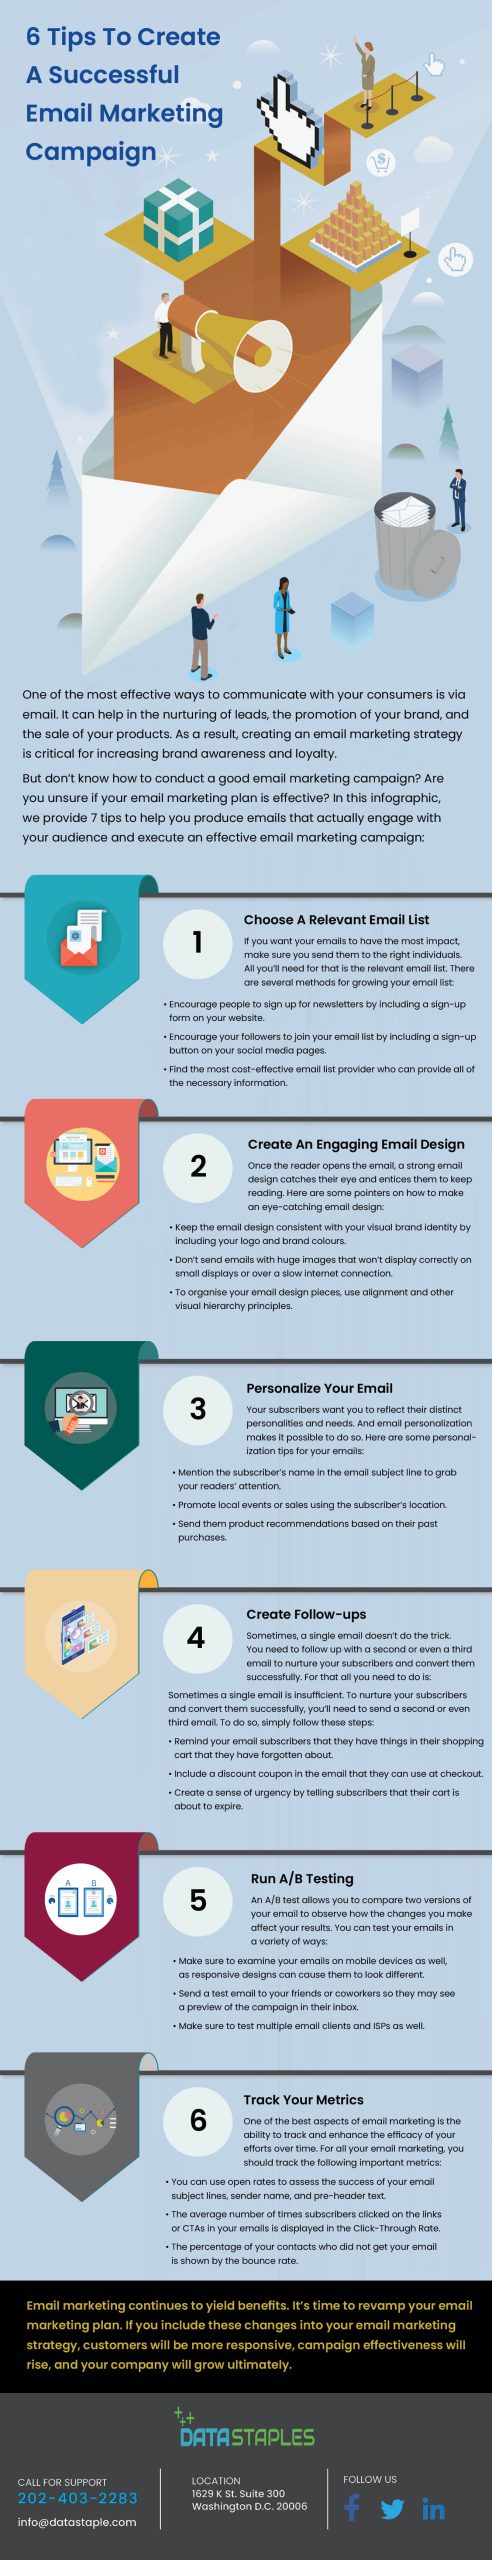 6 Tips To Create A Successful Email Marketing Campaign | DataStaples